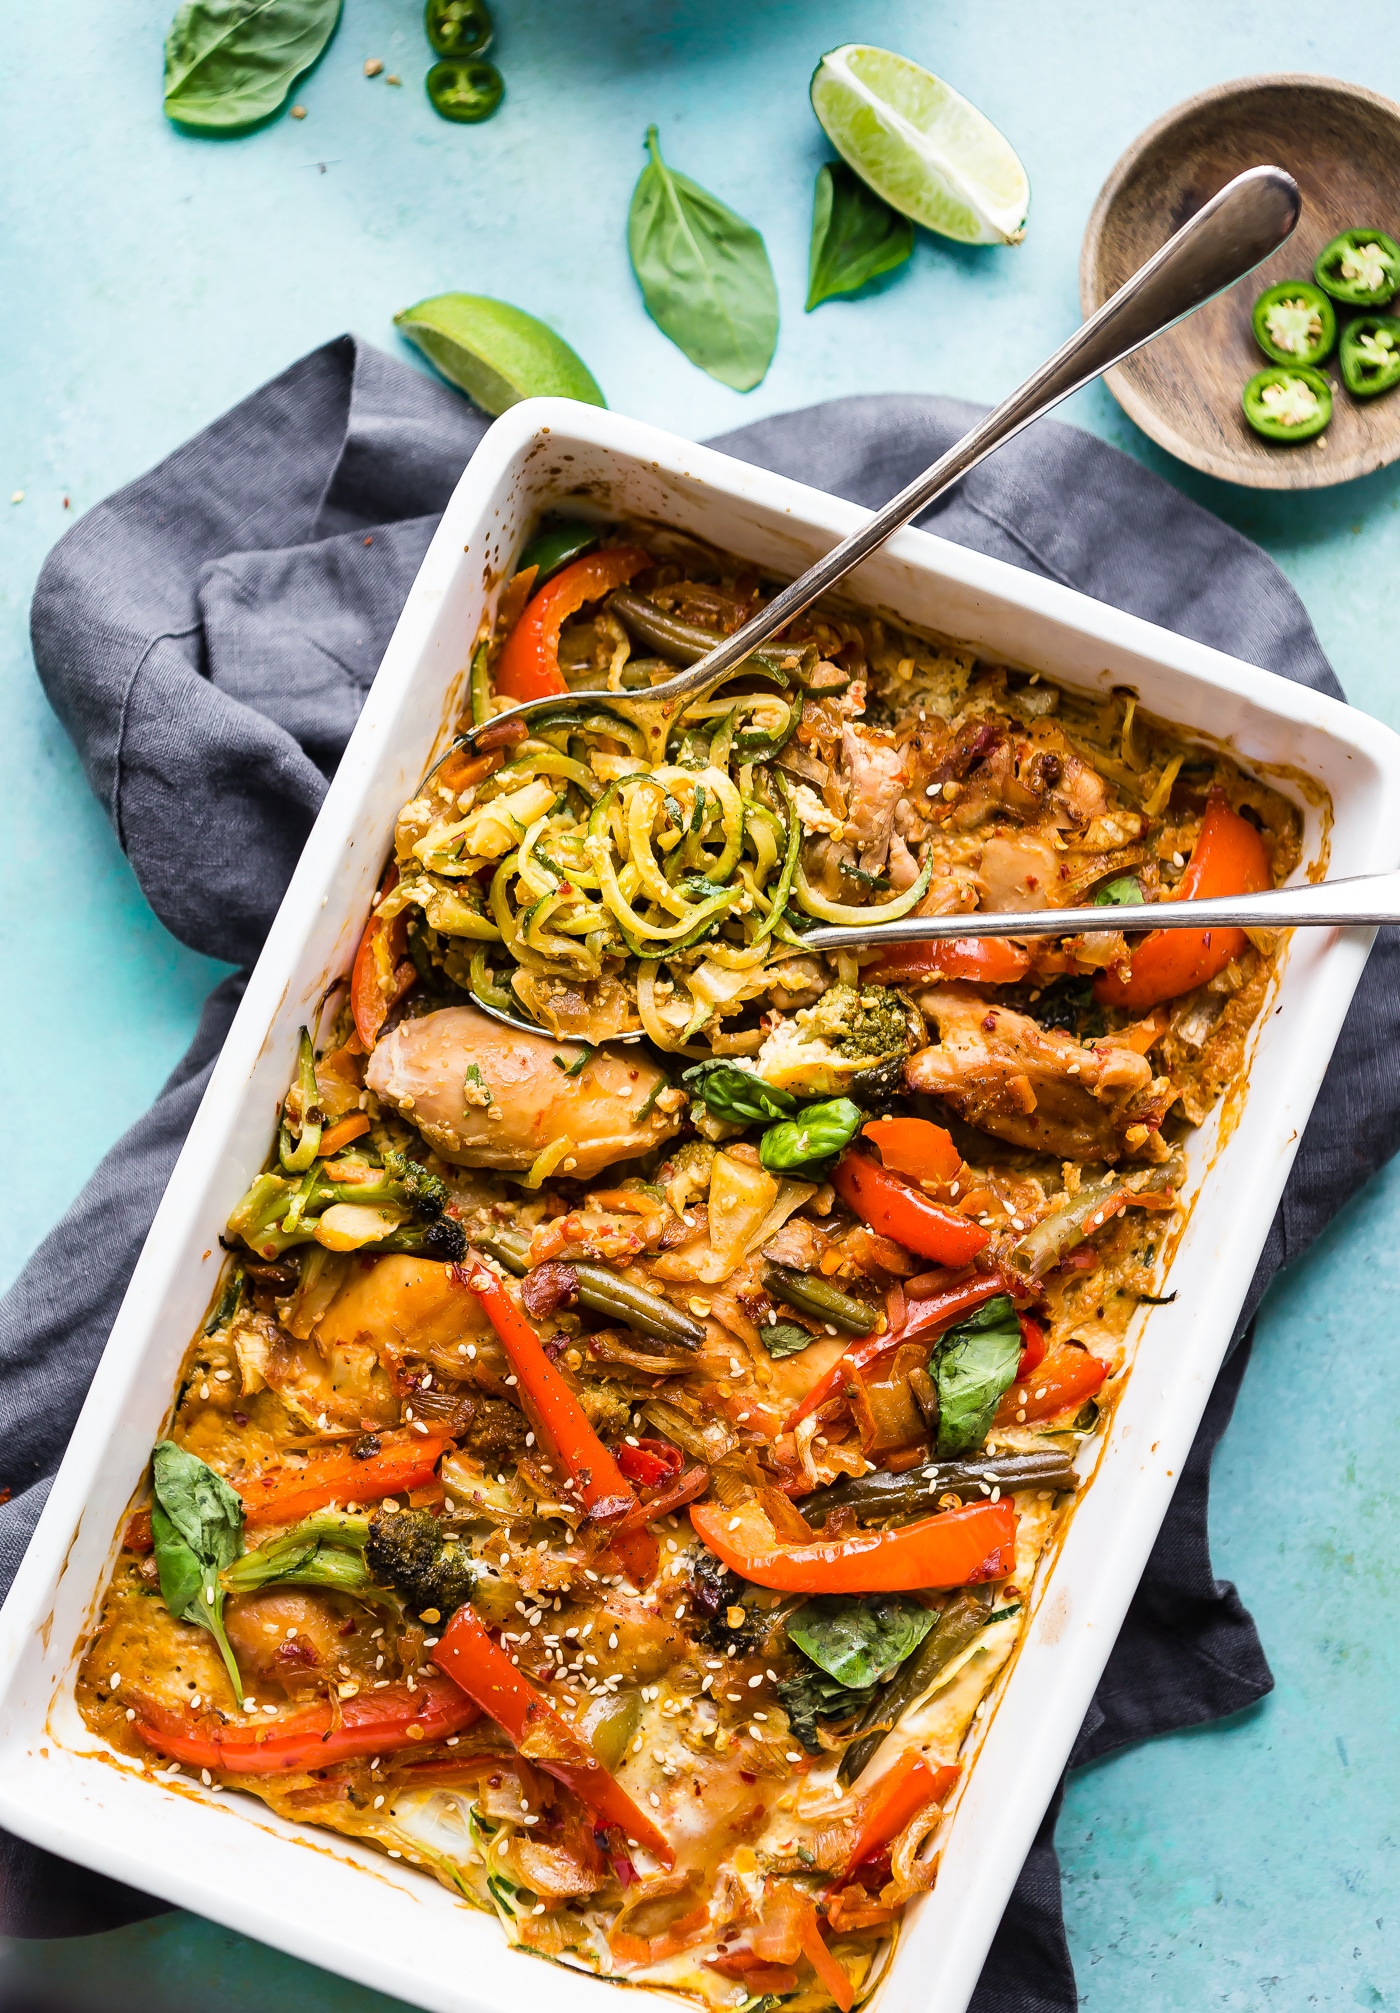 Drunken Chicken Zoodle Casserole takes a spin on the original Pad kee mao Asian stir fry and puts it in casserole form. A paleo zucchini noodle casserole with tons of flavor, Thai spices, and simple healthy ingredients! A delicious, light, high protein, low carb recipe.